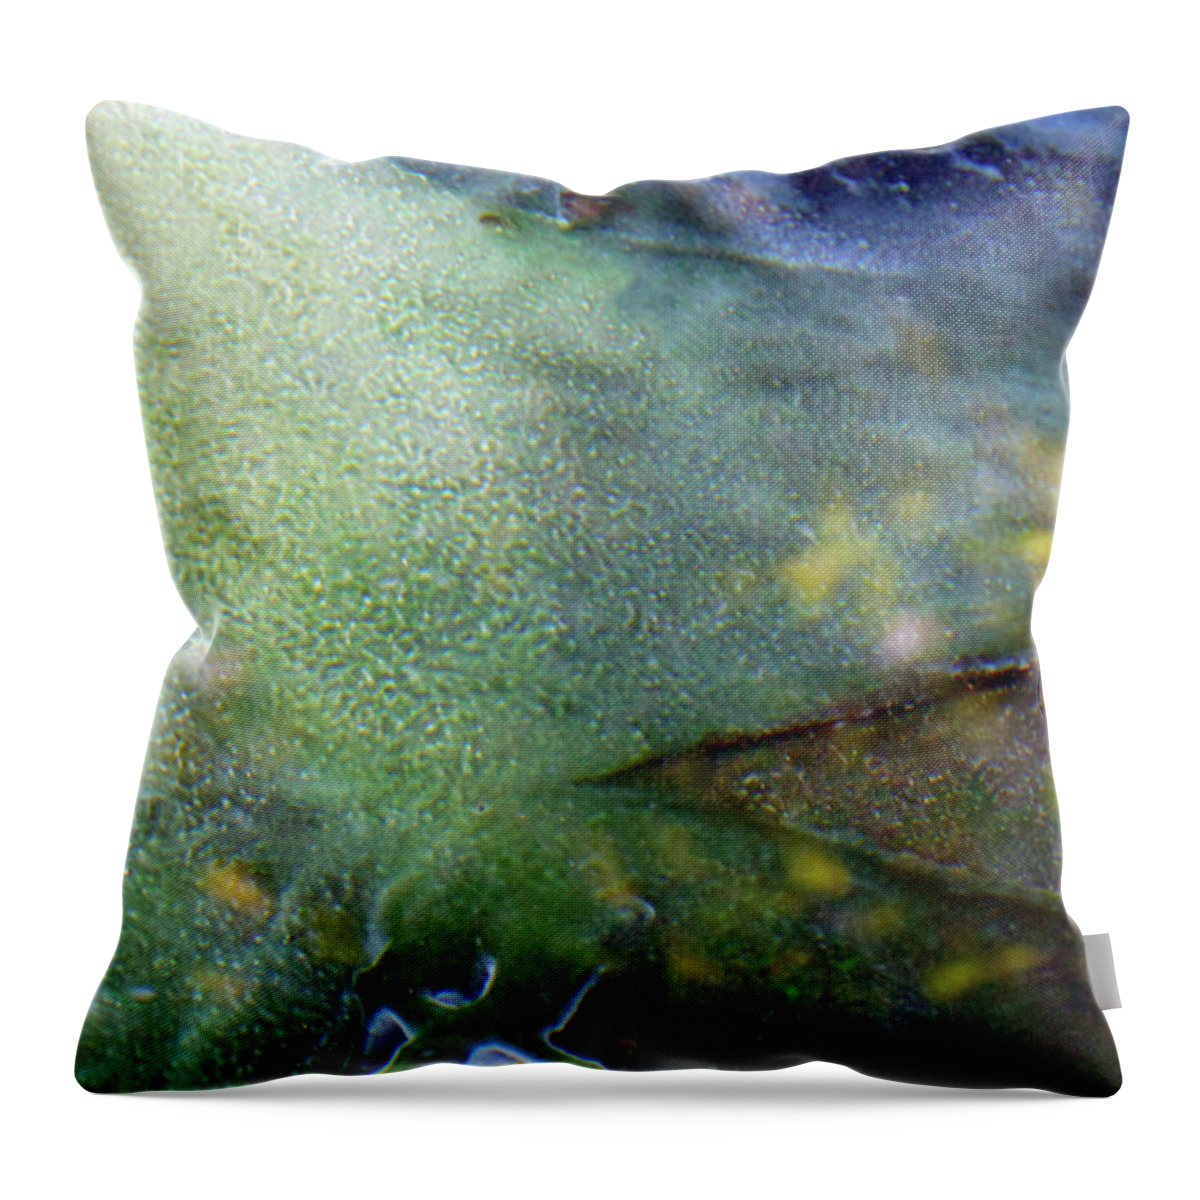 Abstract Photography Throw Pillow featuring the photograph Cosmic Creek 2 by Deborah Ann Good